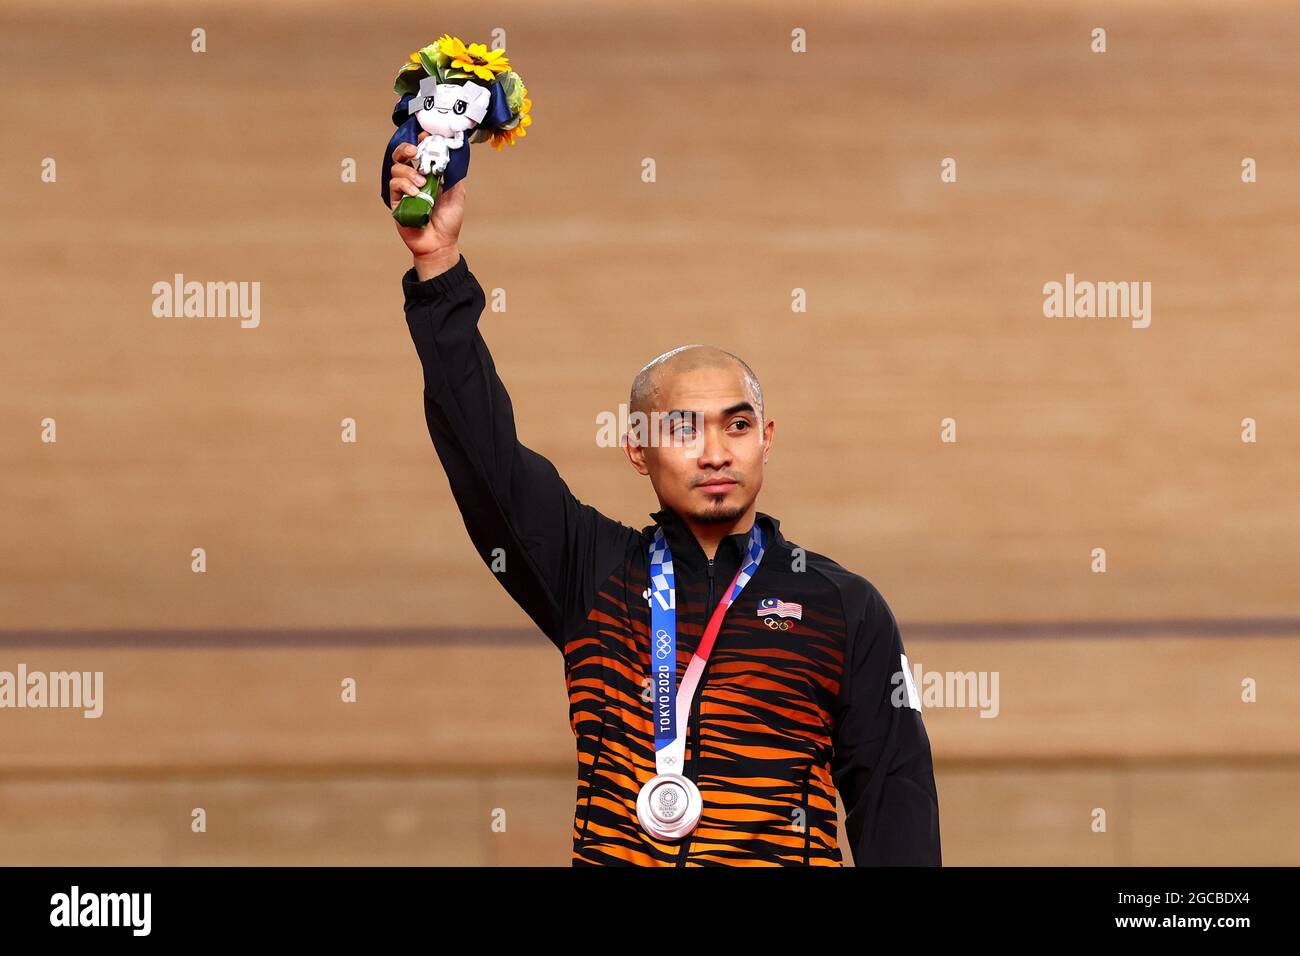 The medals at malaysia olympics Olympic Medal